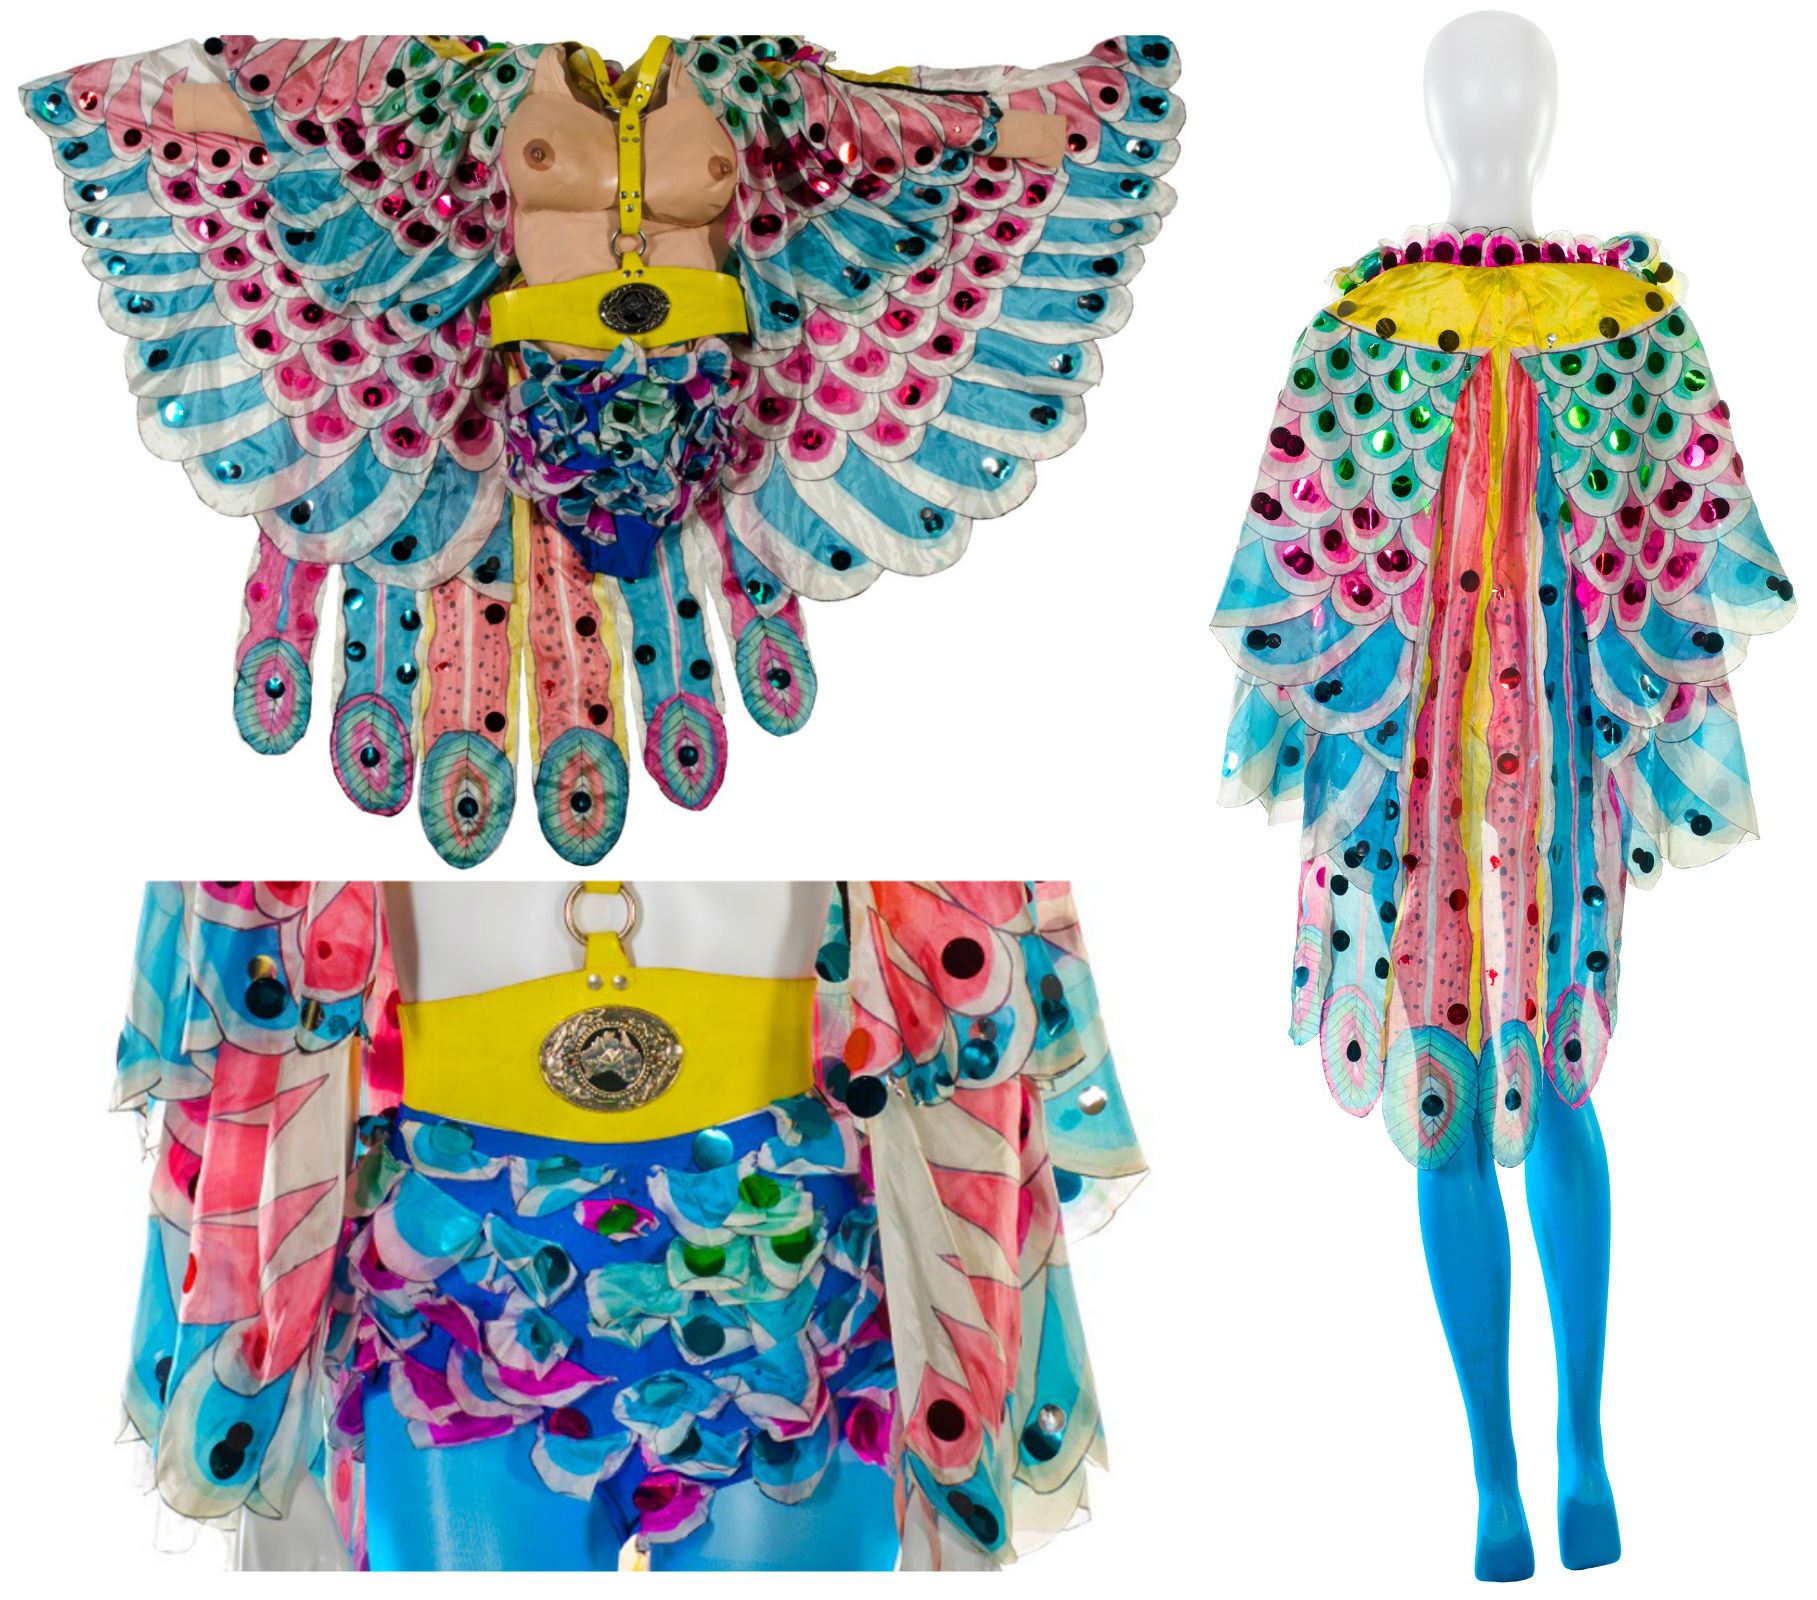 Front and back view of the costume worn by Jo Kennedy in the high-wire scene of the film Starstruck. The costume is designed to resemble peacock feathers.